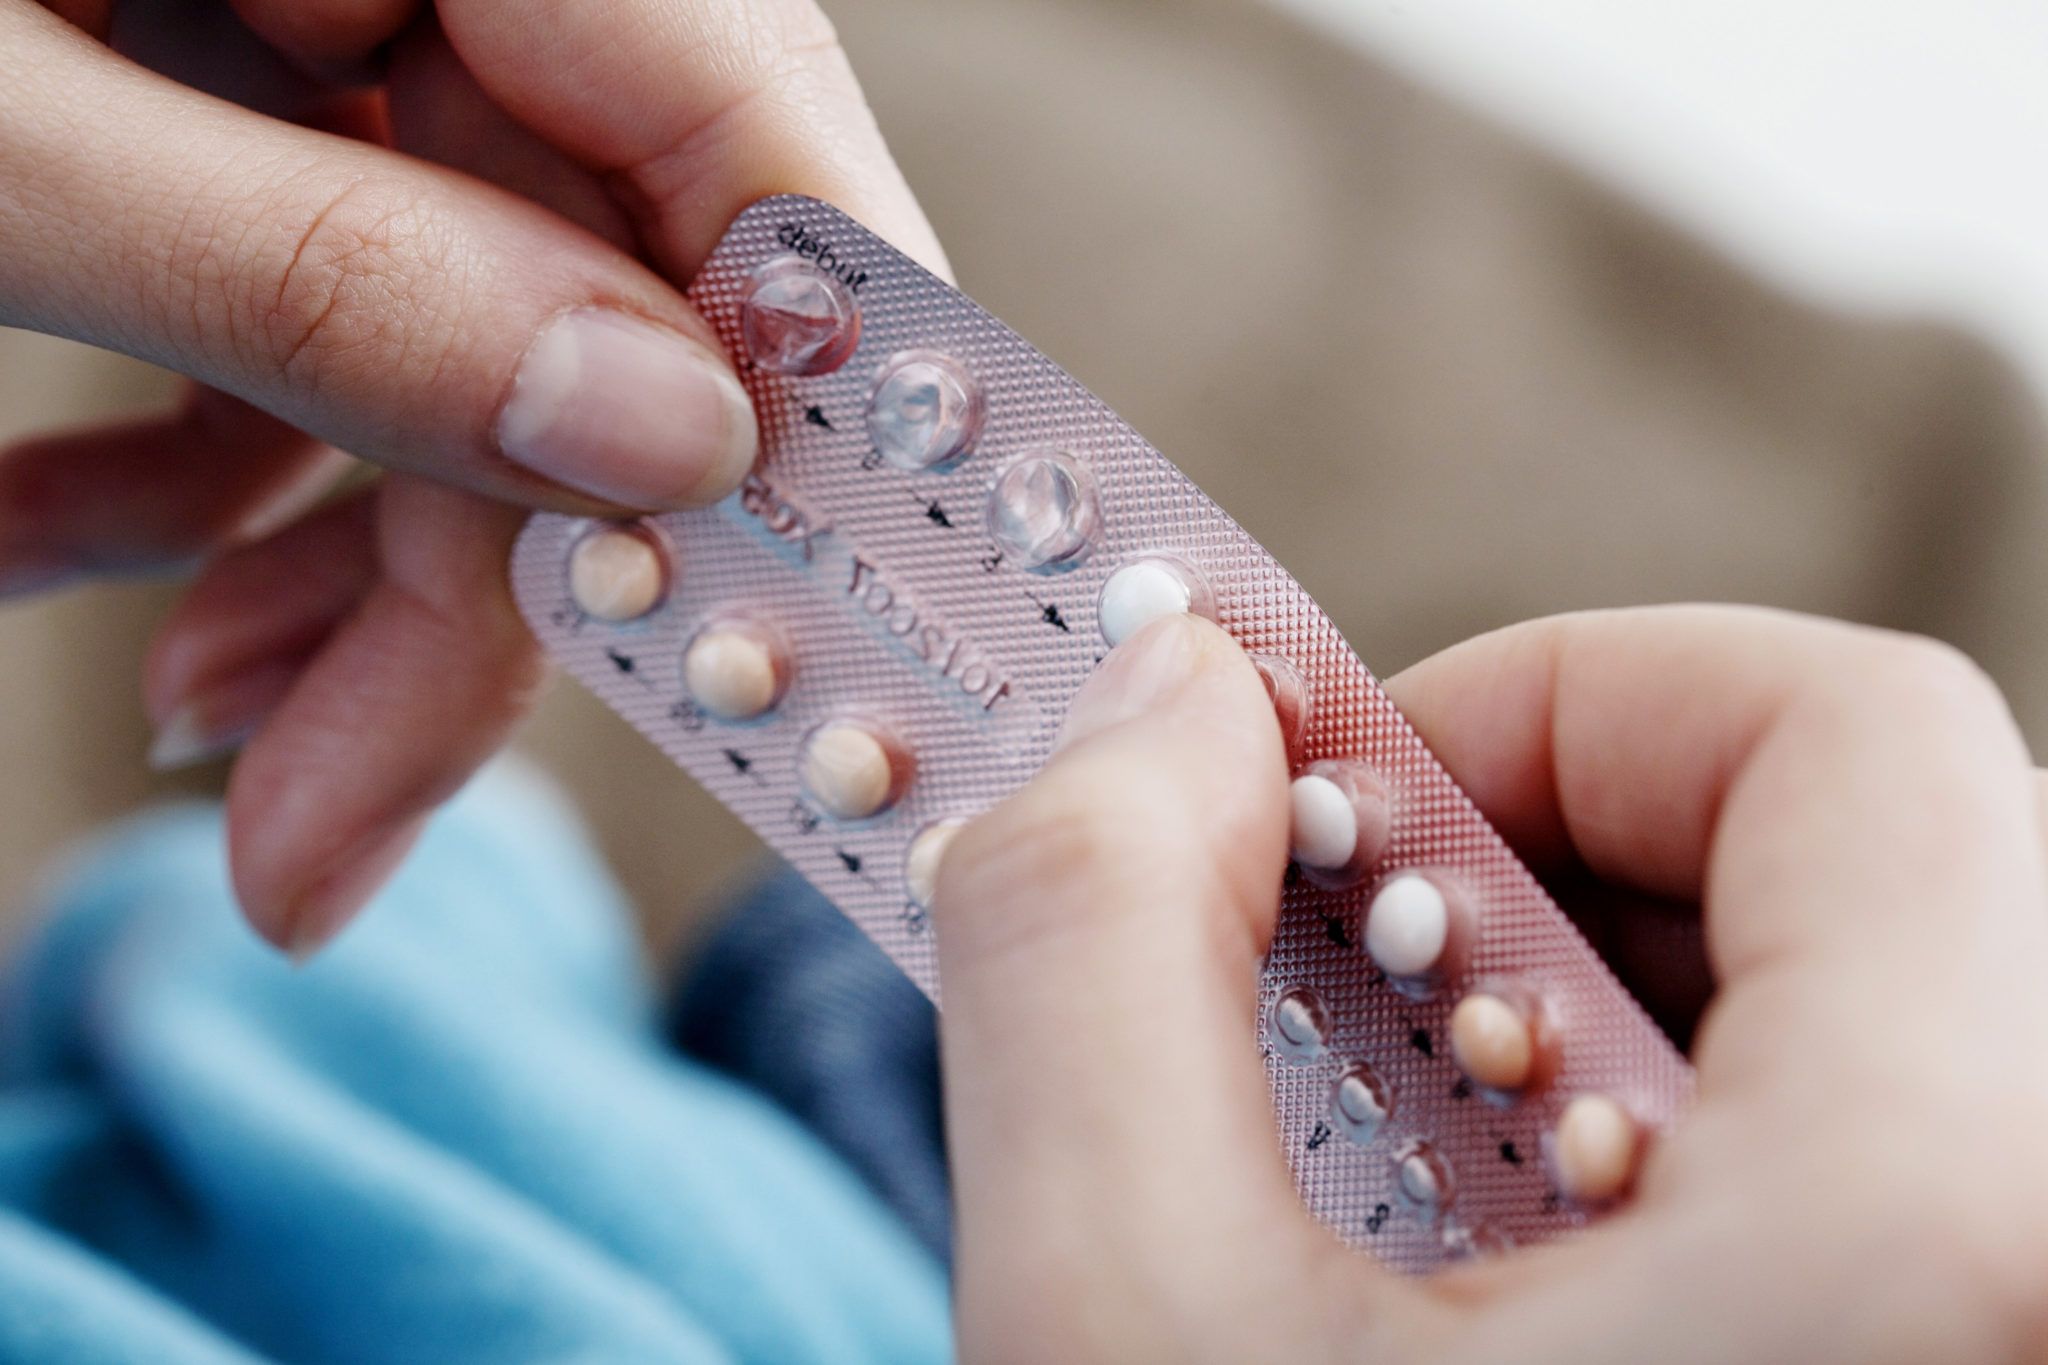 Free contraception for women aged 17-25 due in a matter of weeks